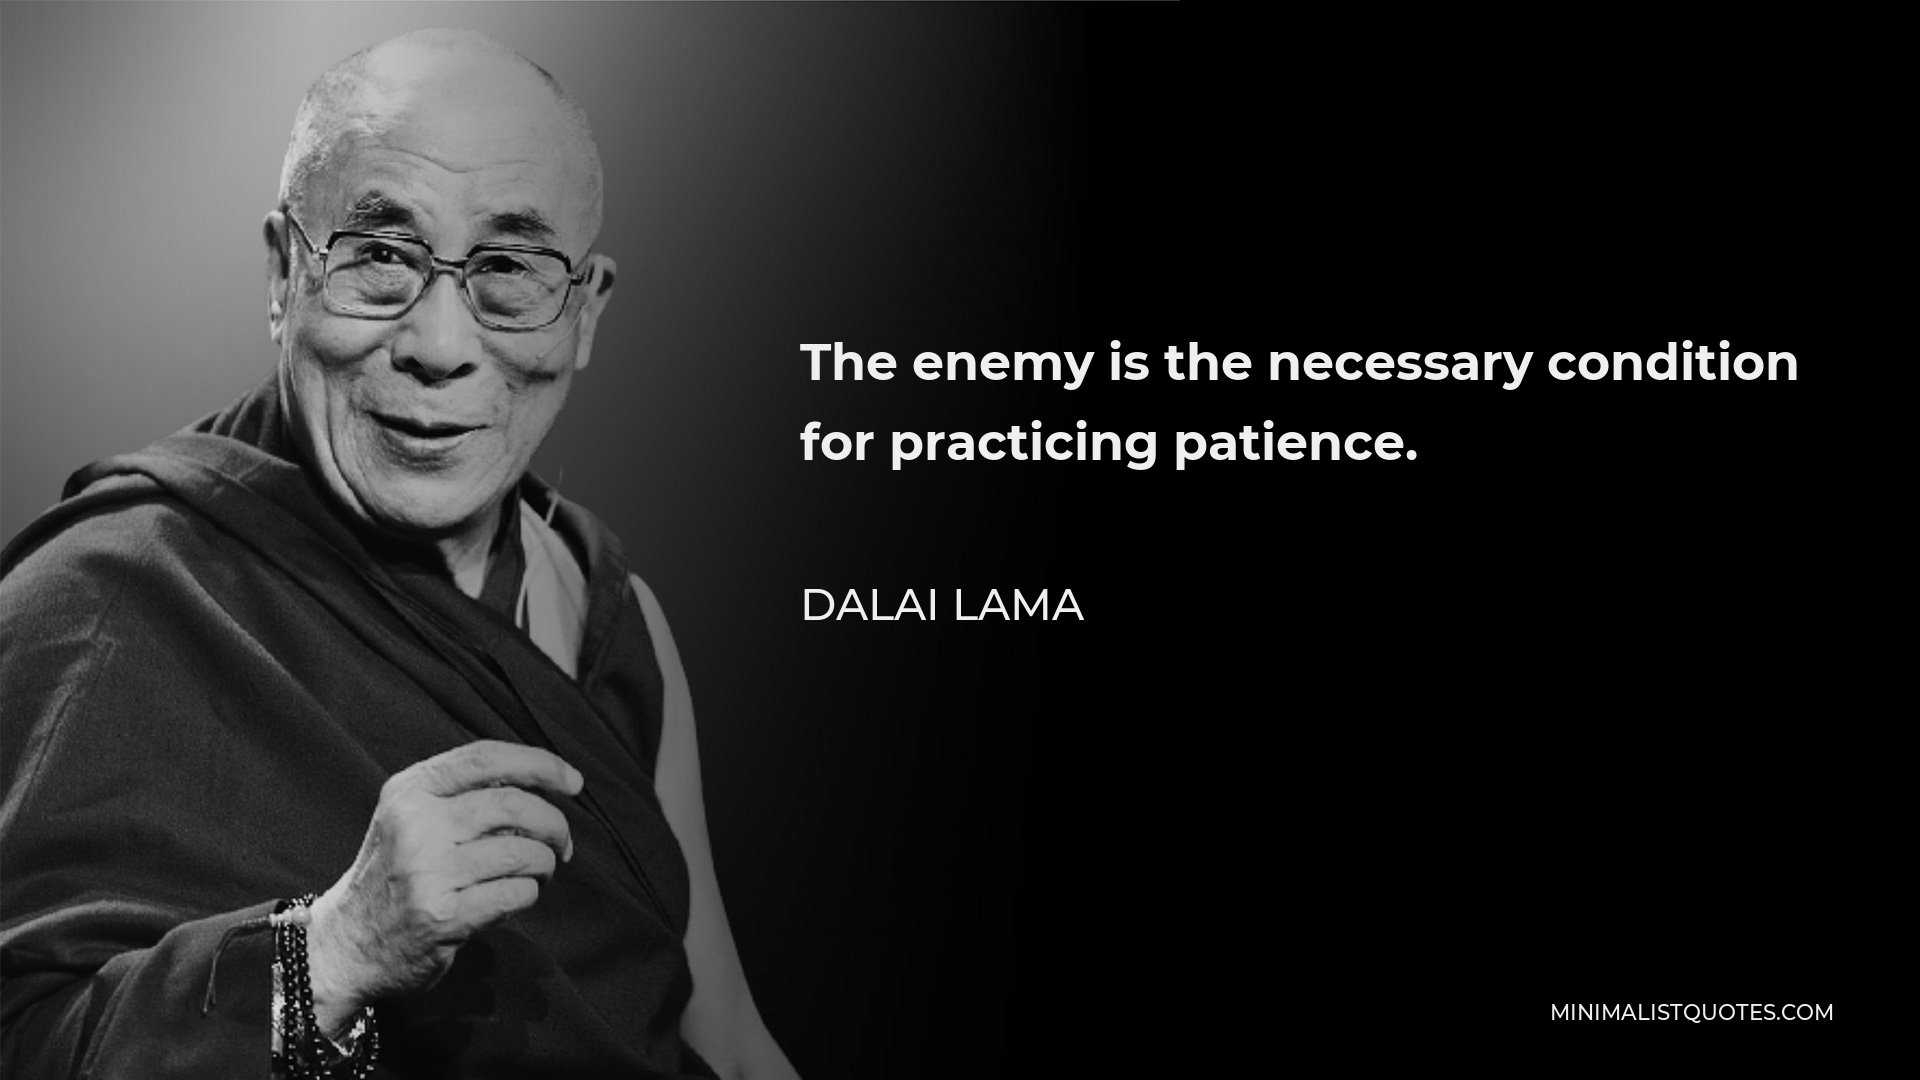 Dalai Lama Quote - The enemy is the necessary condition for practicing patience.